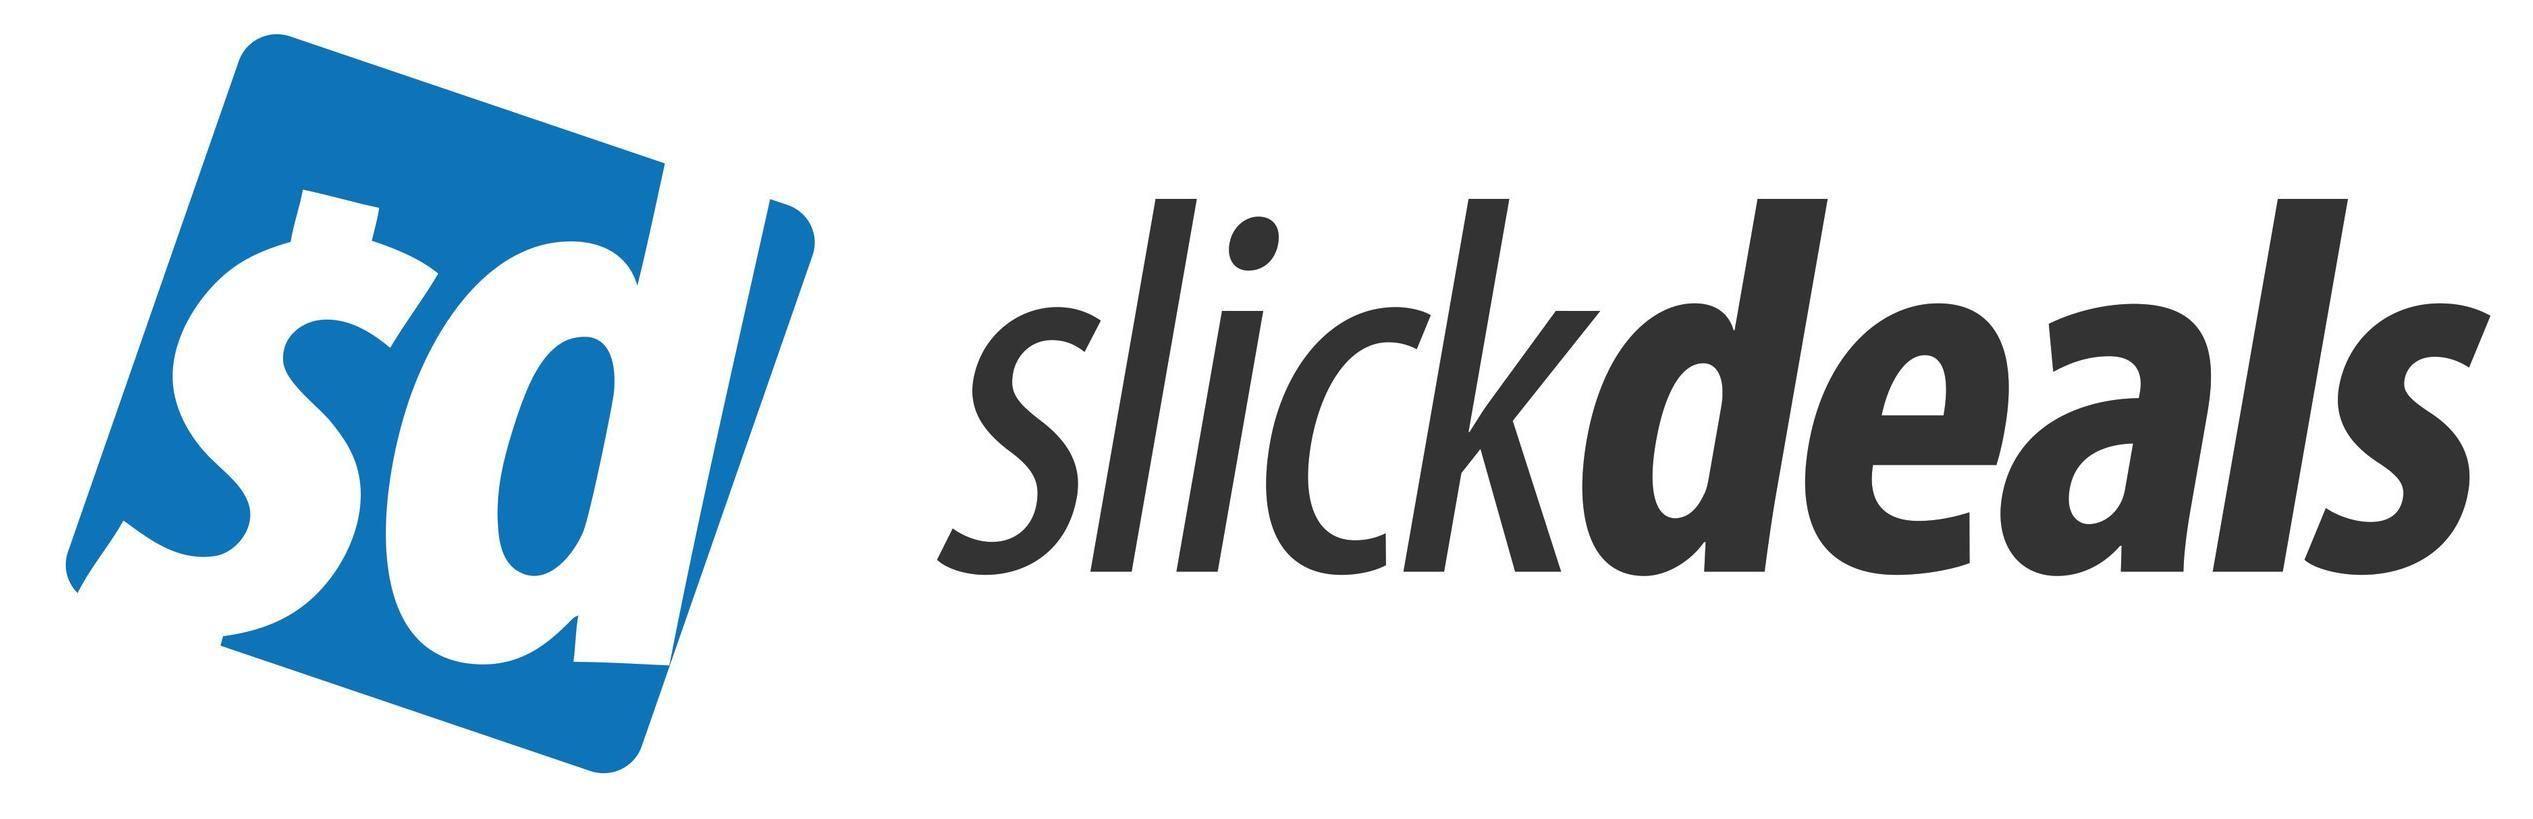 Slickdeals Logo - Slickdeals Competitors, Revenue and Employees - Owler Company Profile